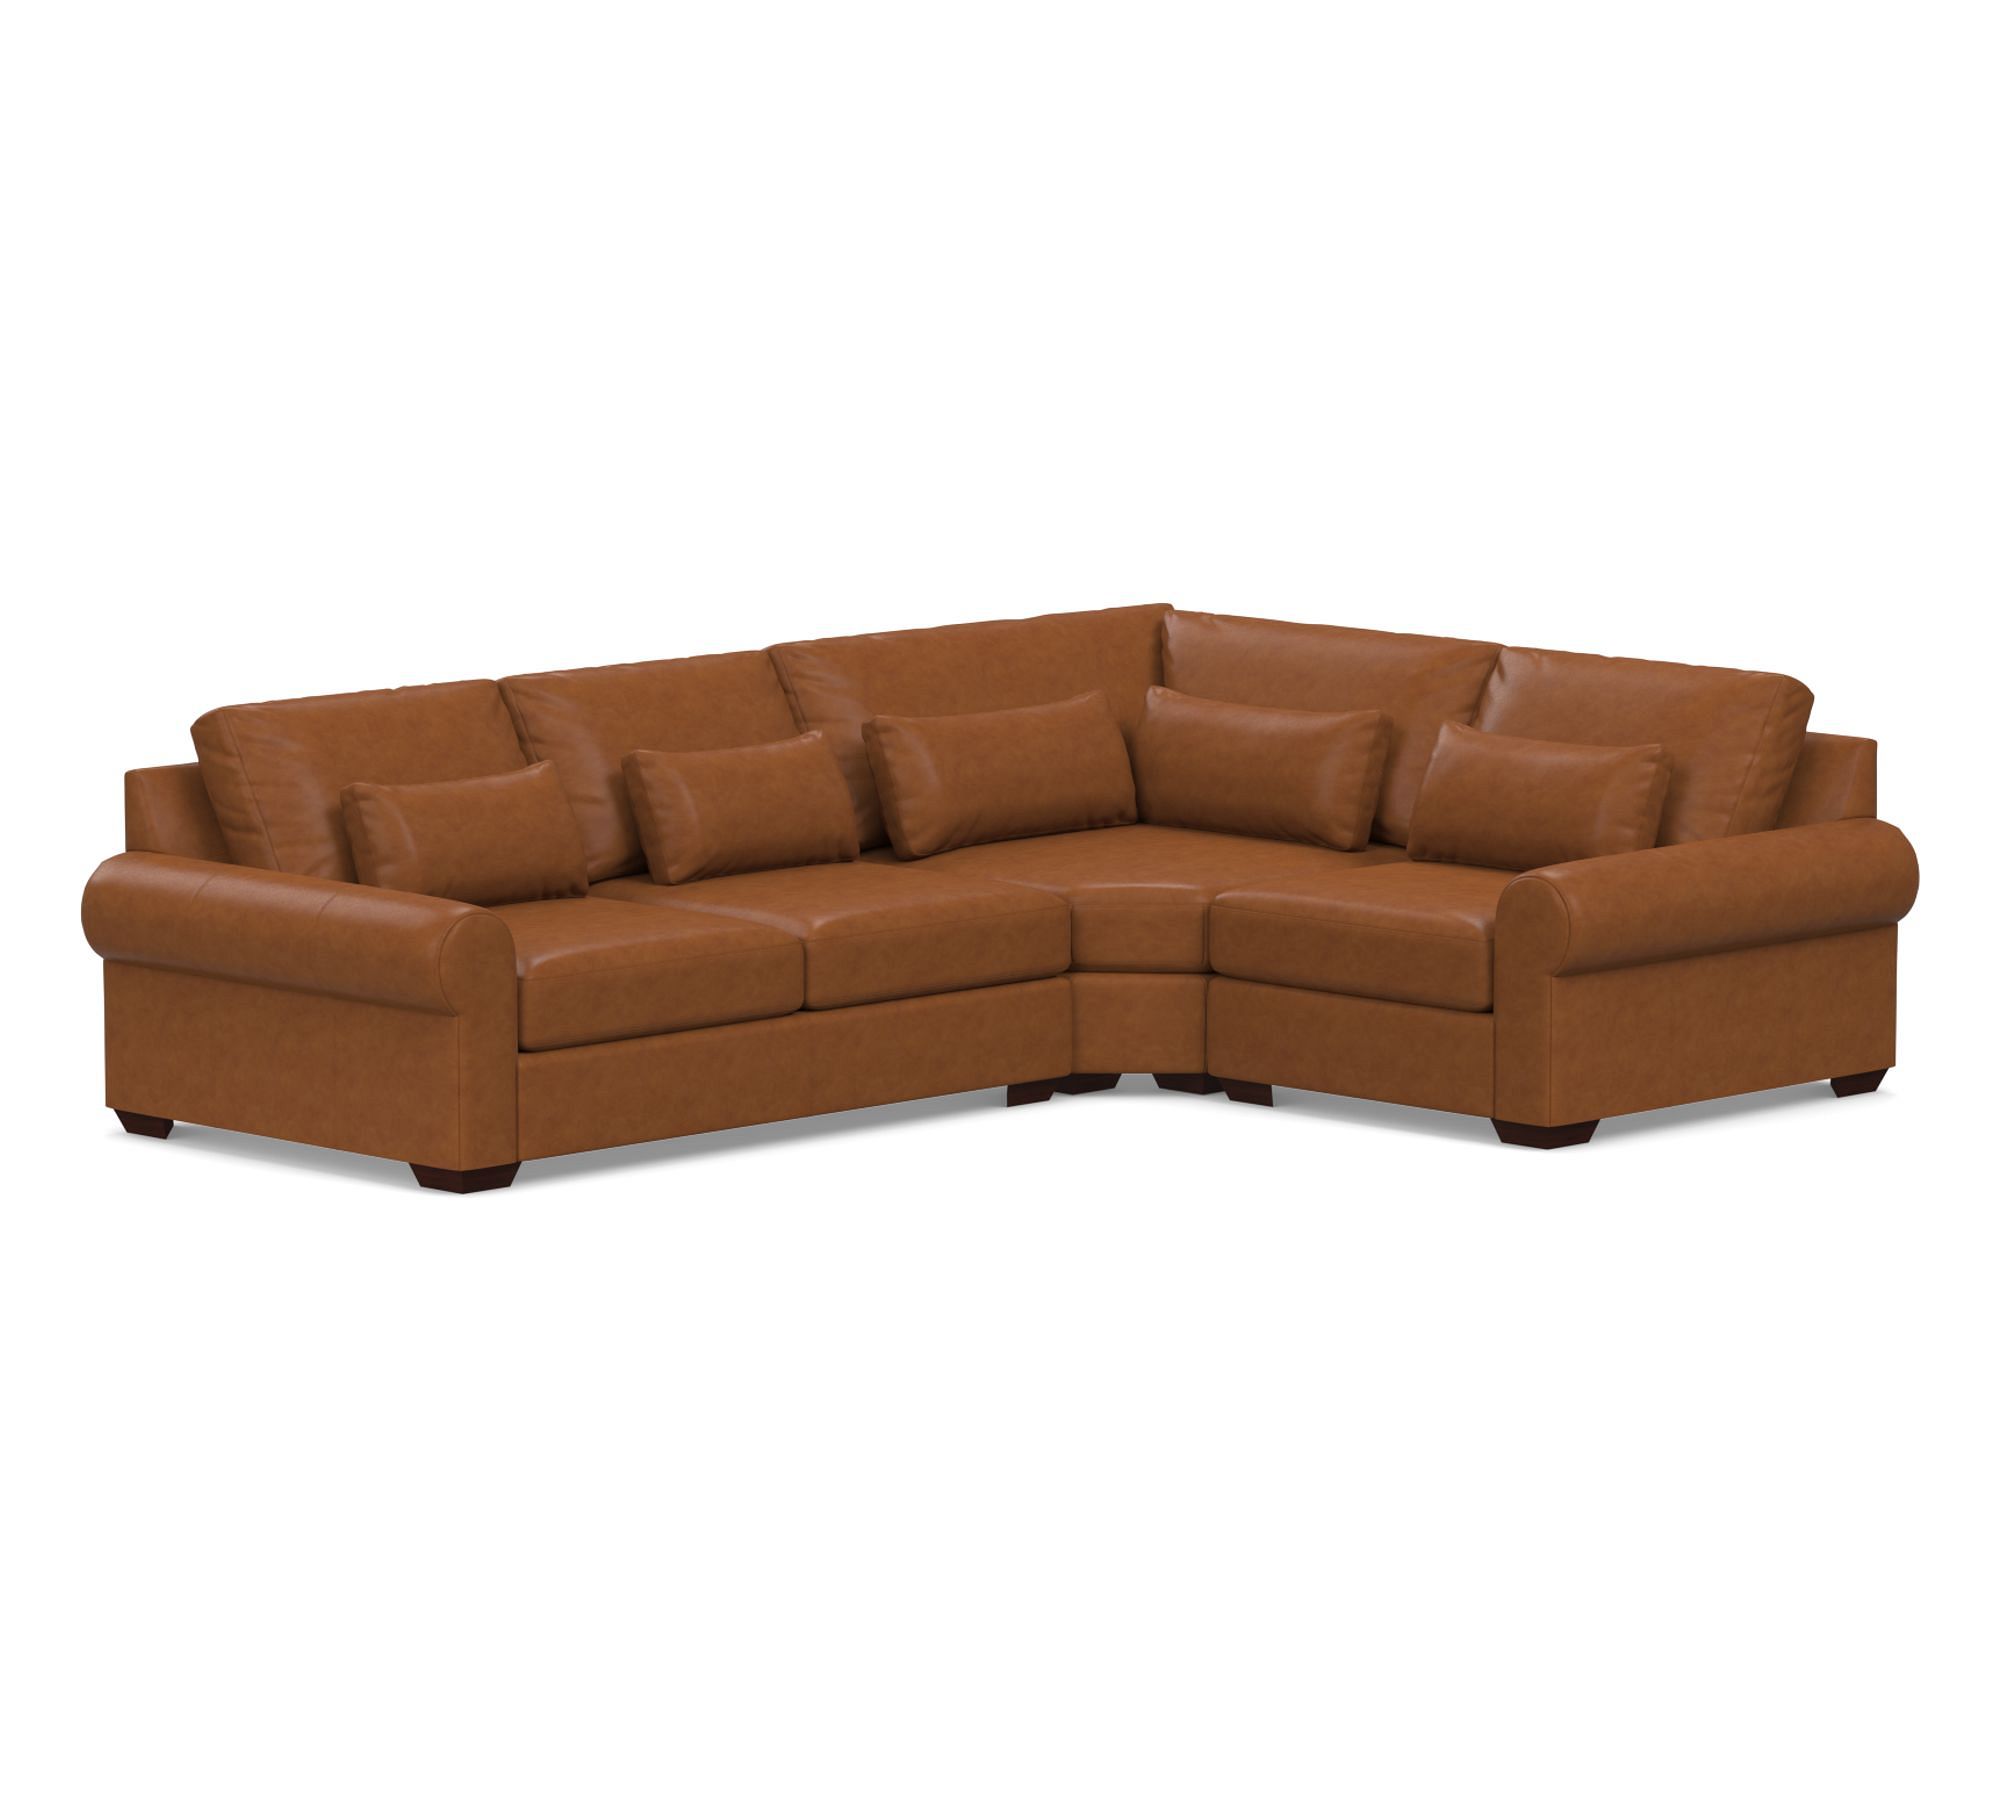 Big Sur Roll Arm Deep Seat Leather 3-Piece Wedge Sectional (130")